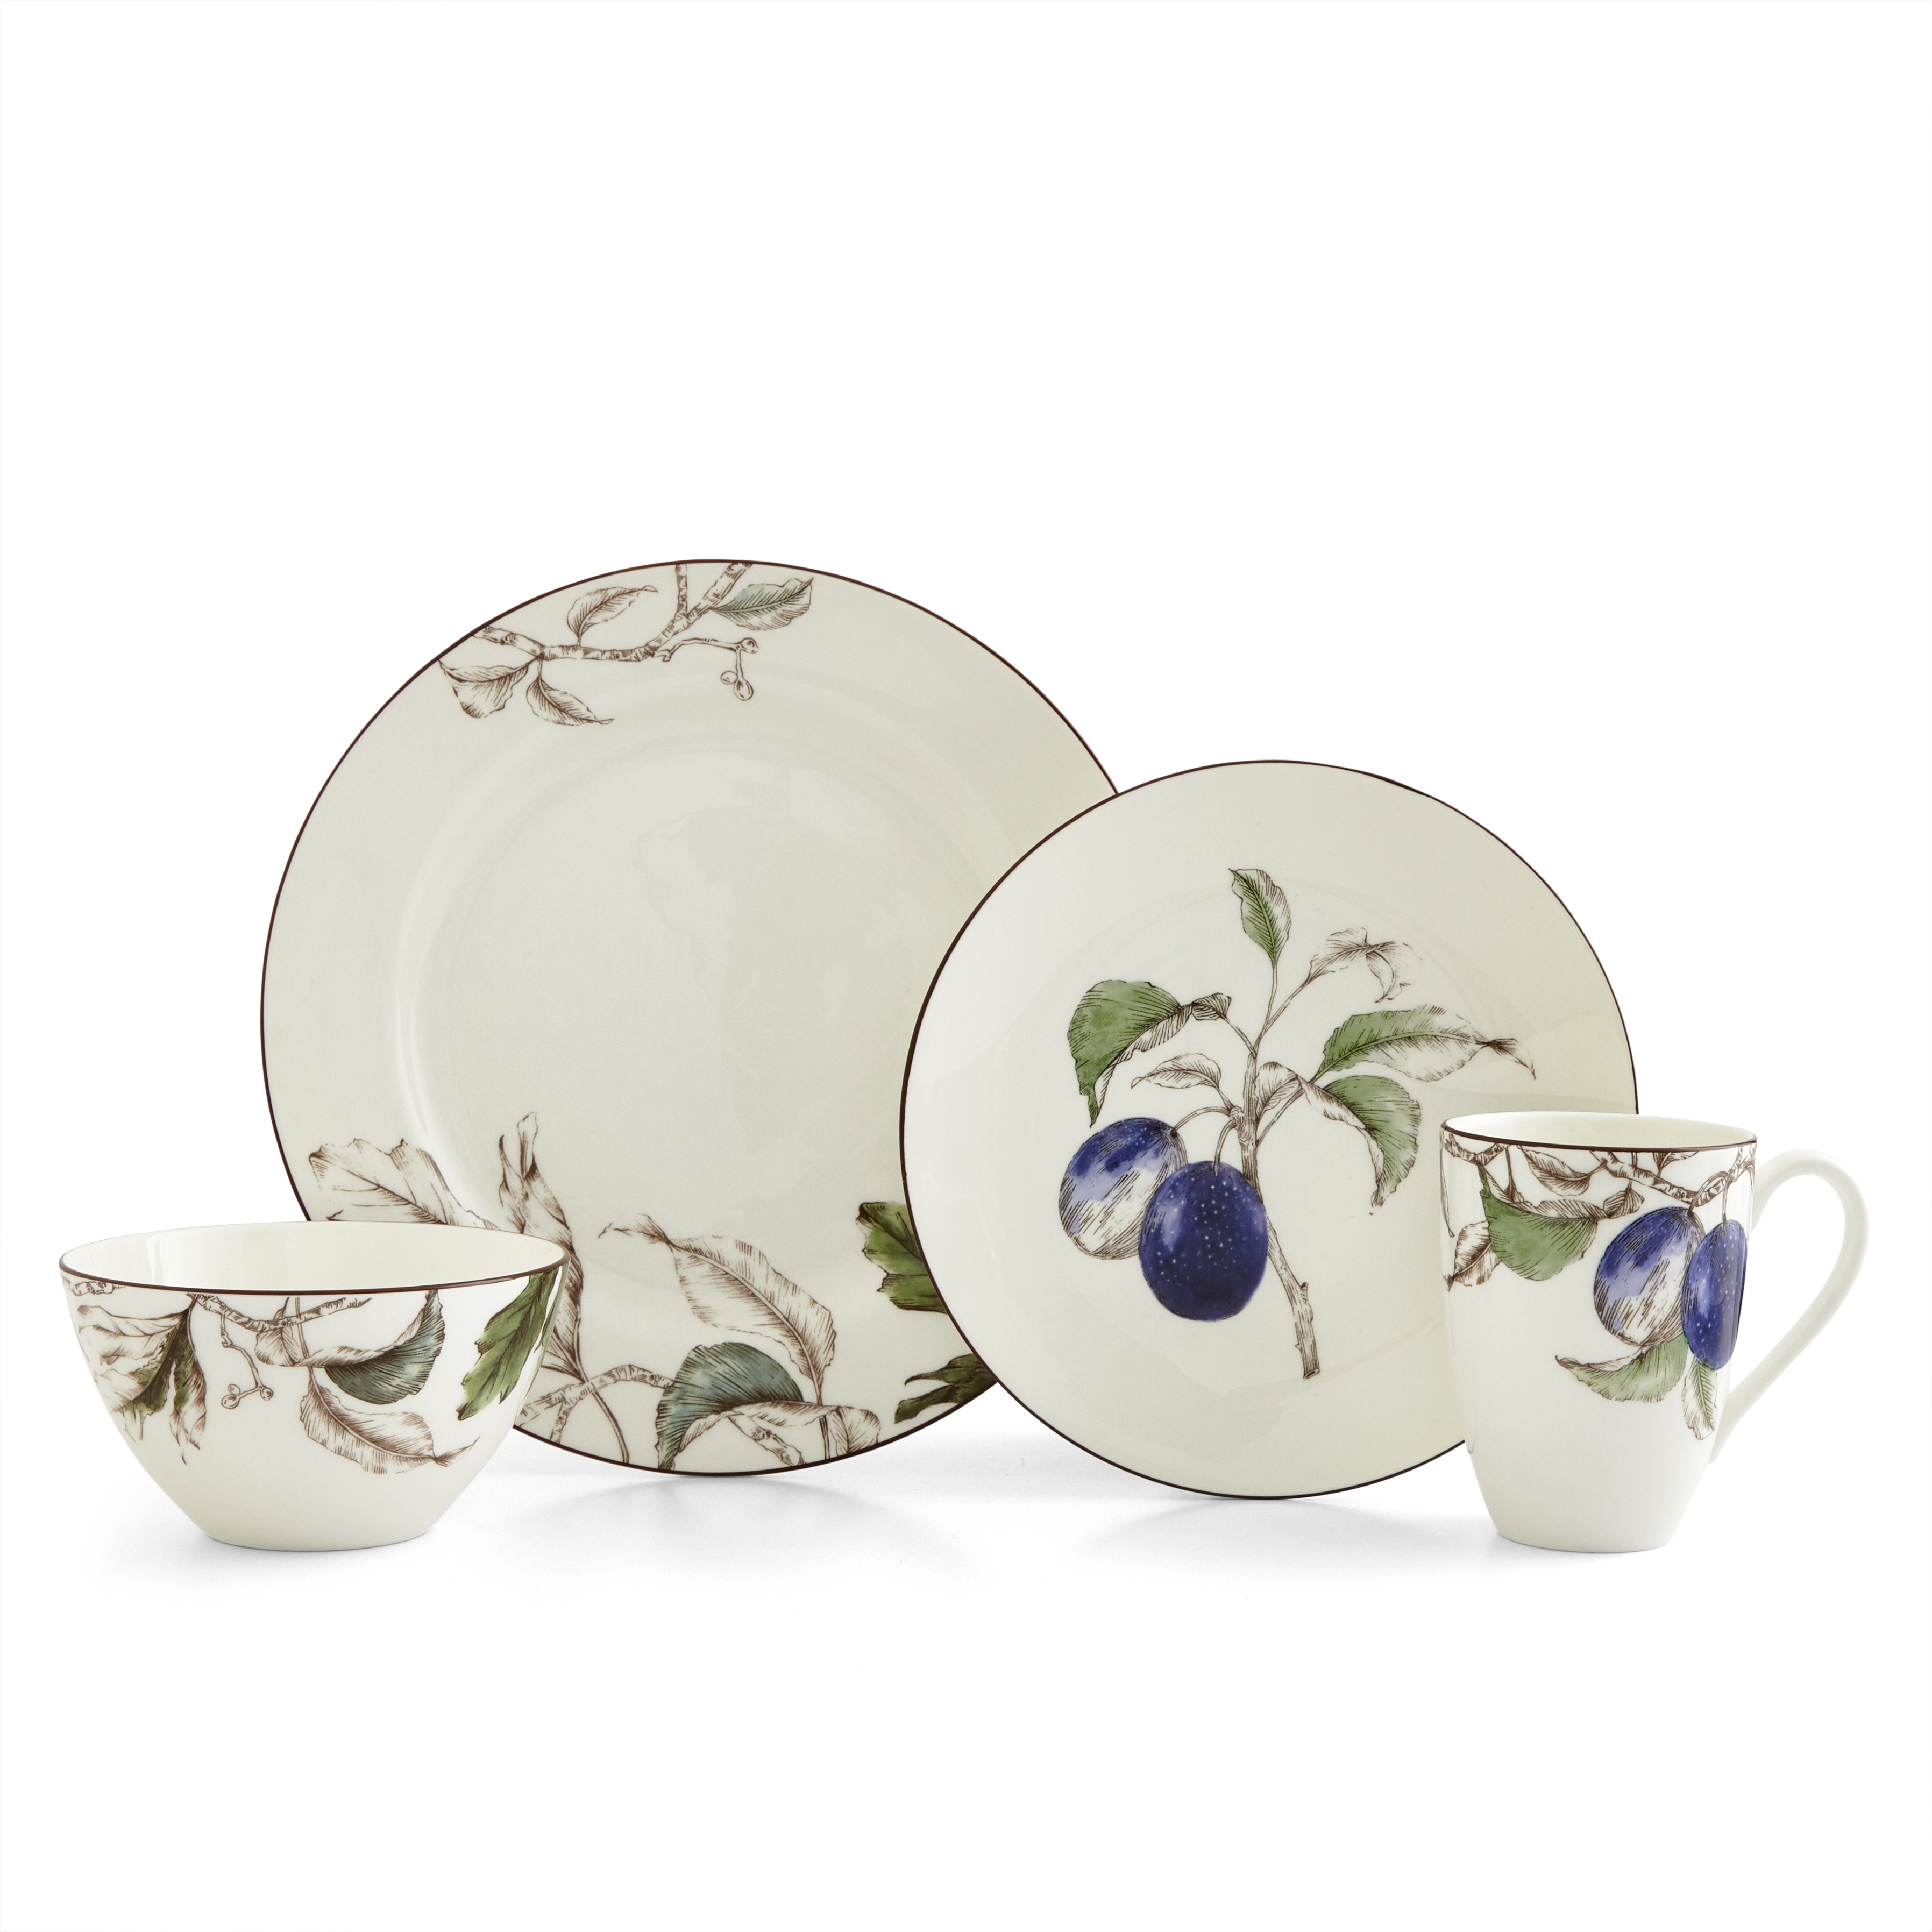 Nature's Bounty 4 Piece Place Setting (Plum) image number null